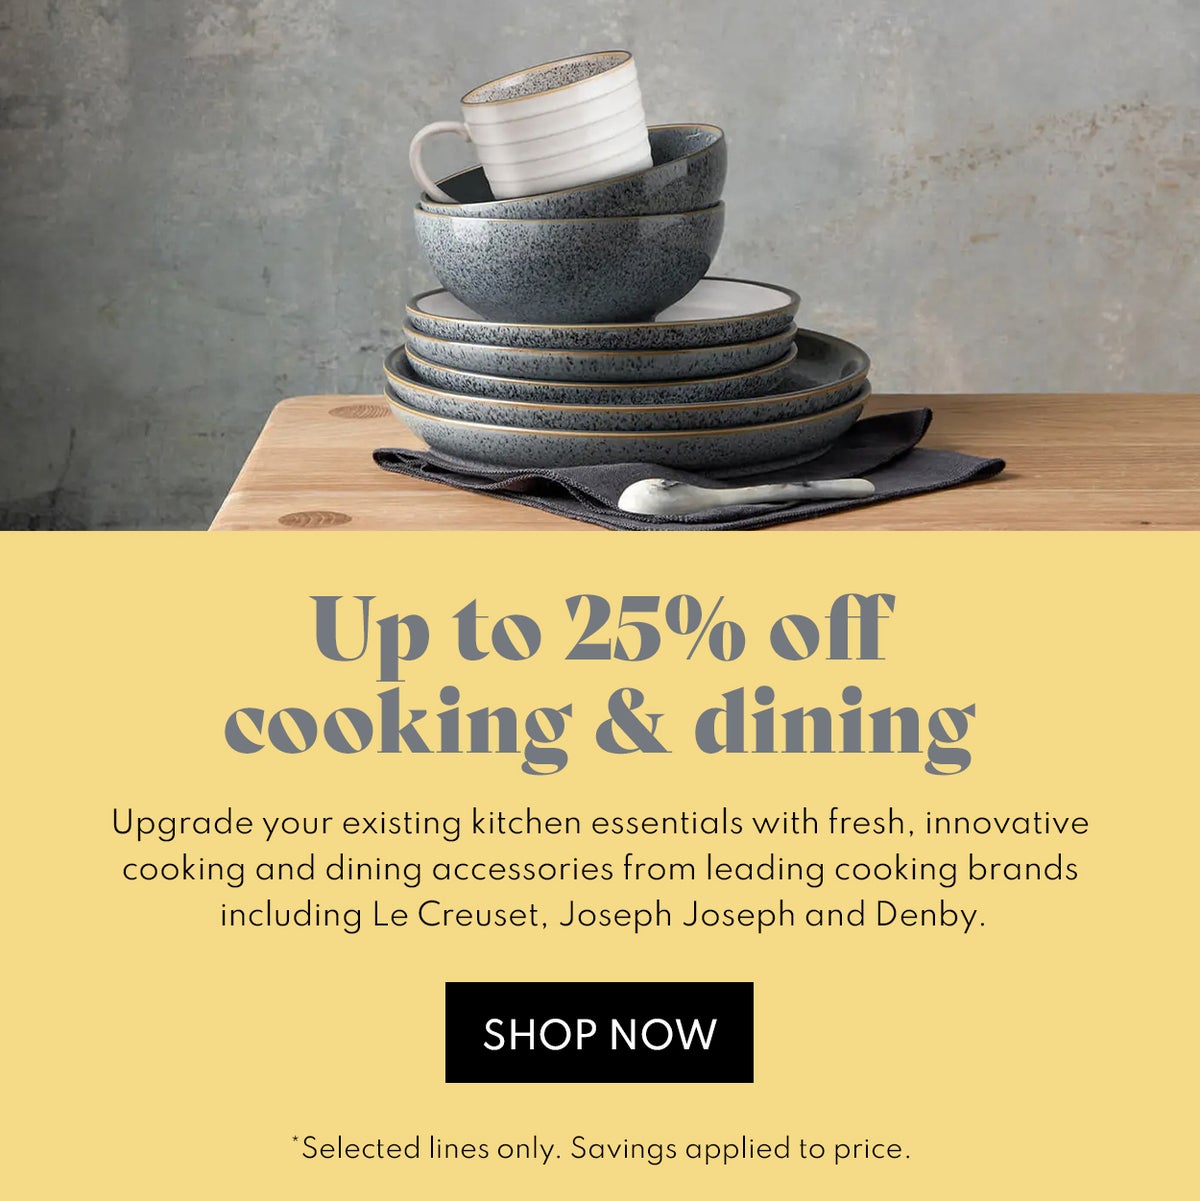 Up to 25% off Cooking & Dining